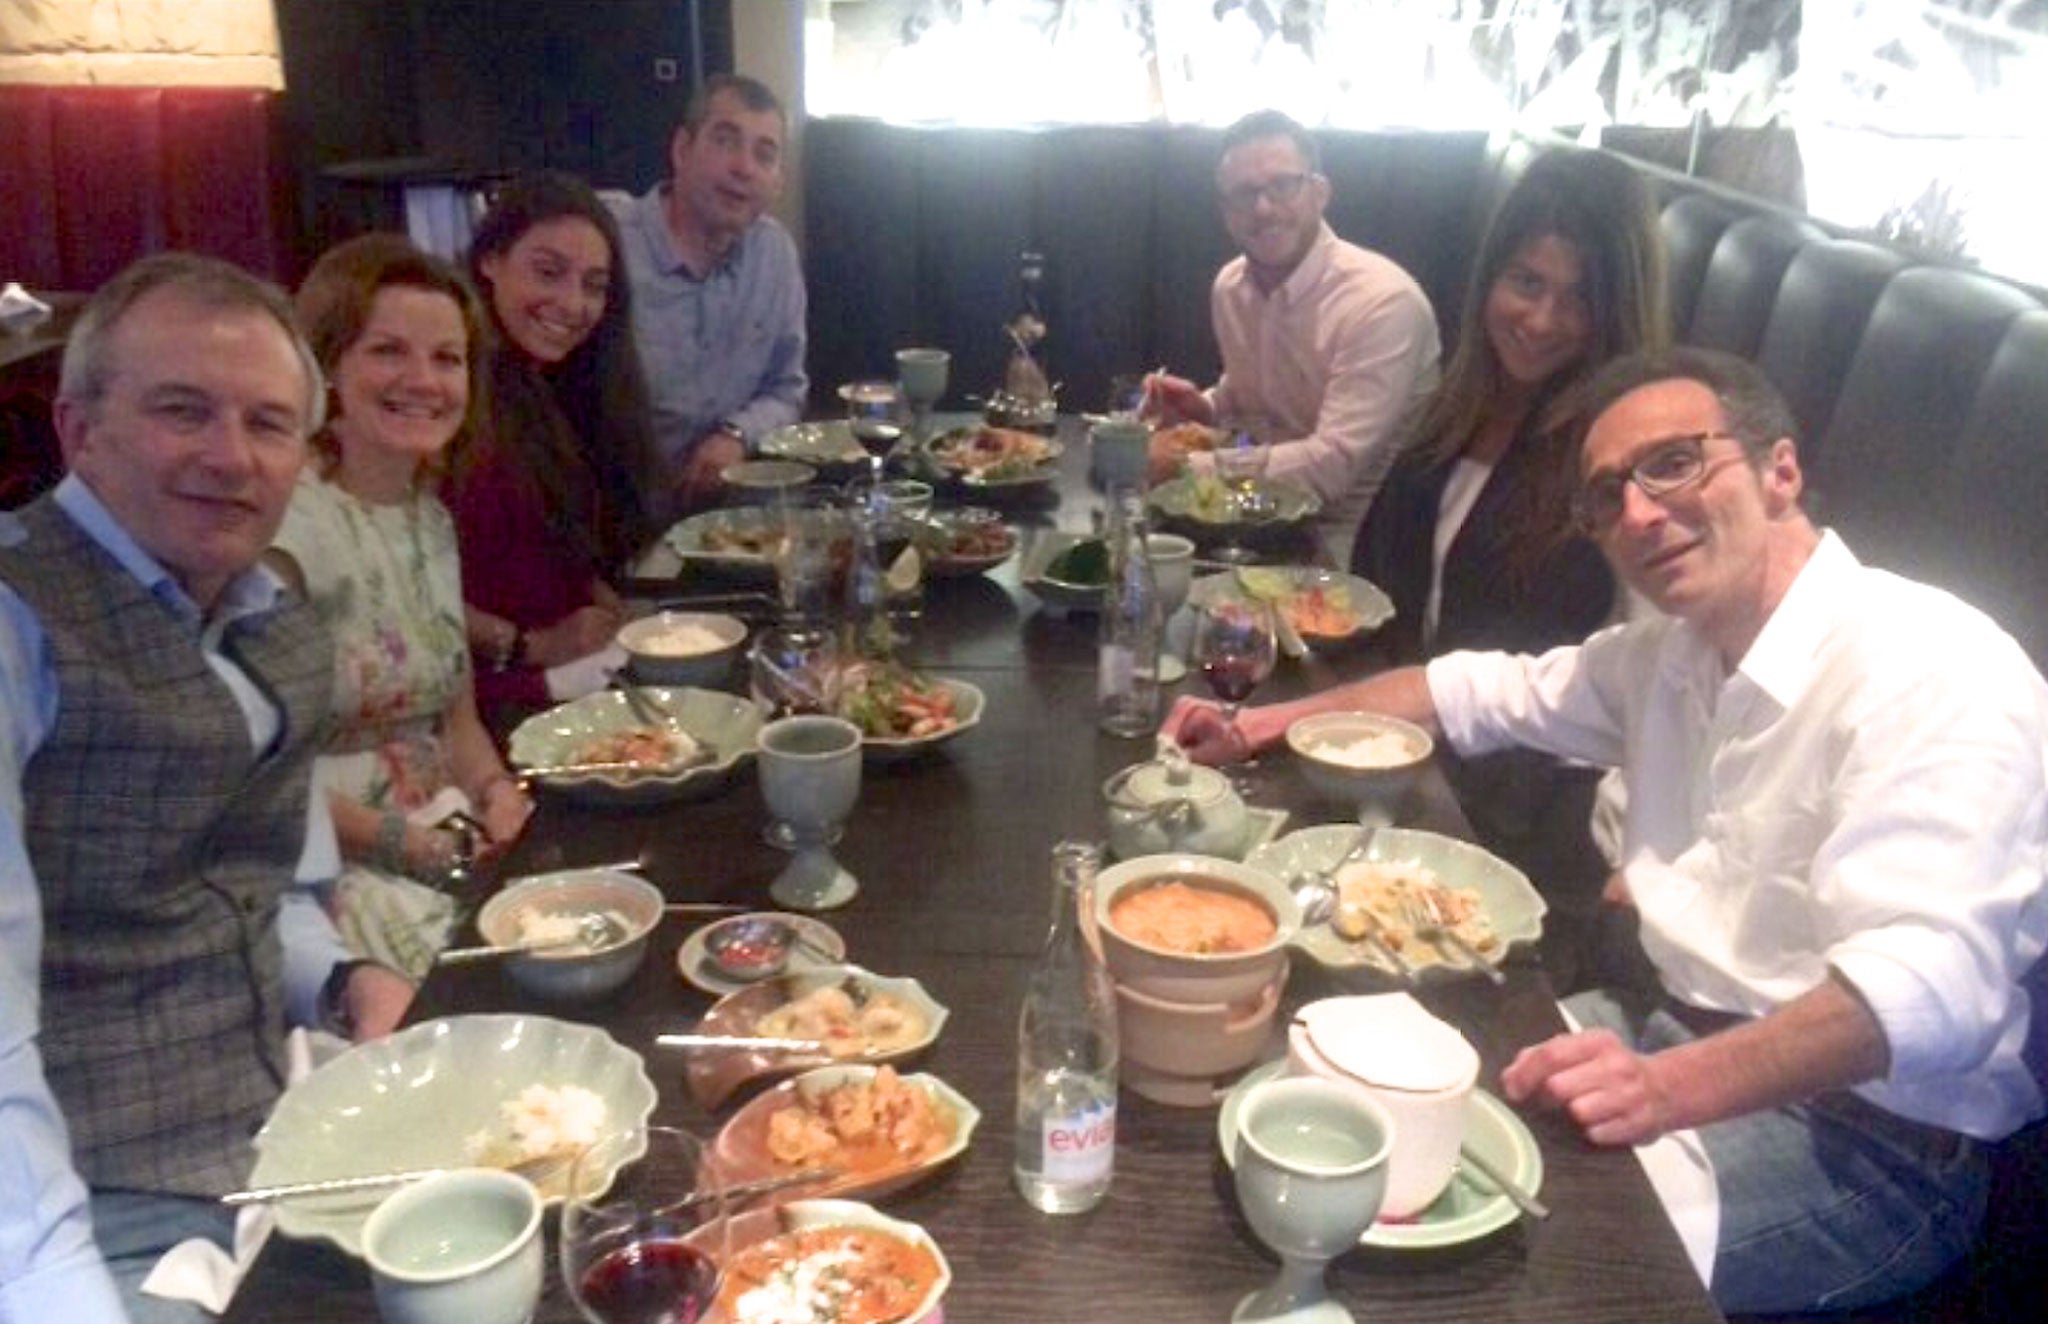 Jeffrey Spector (front right), at his final meal in Switzerland surrounded by friends and family